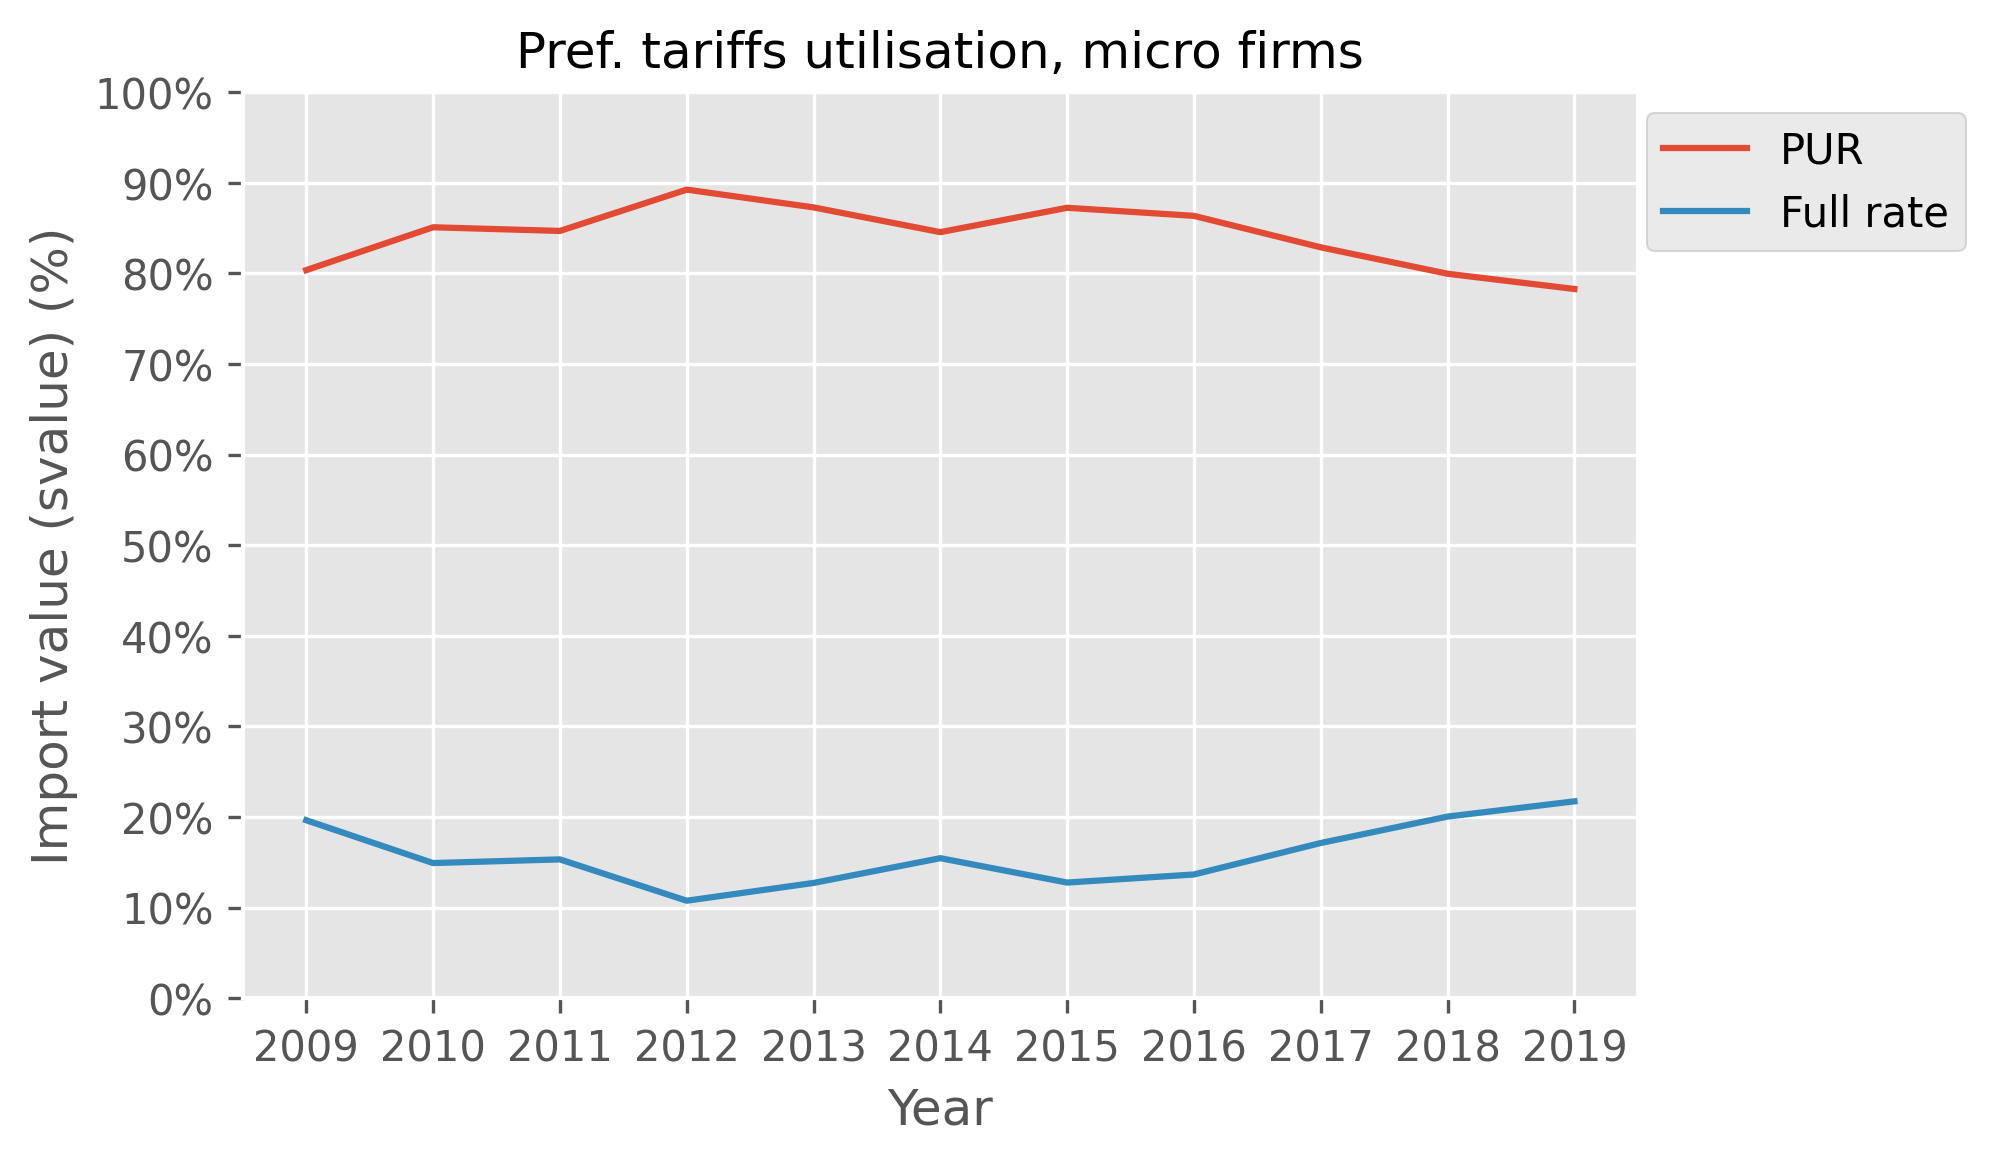 Figure 16: Time series of import transaction value, by tariff type for micro size firms, which exhibits a downward trend from 2015 to 2019.